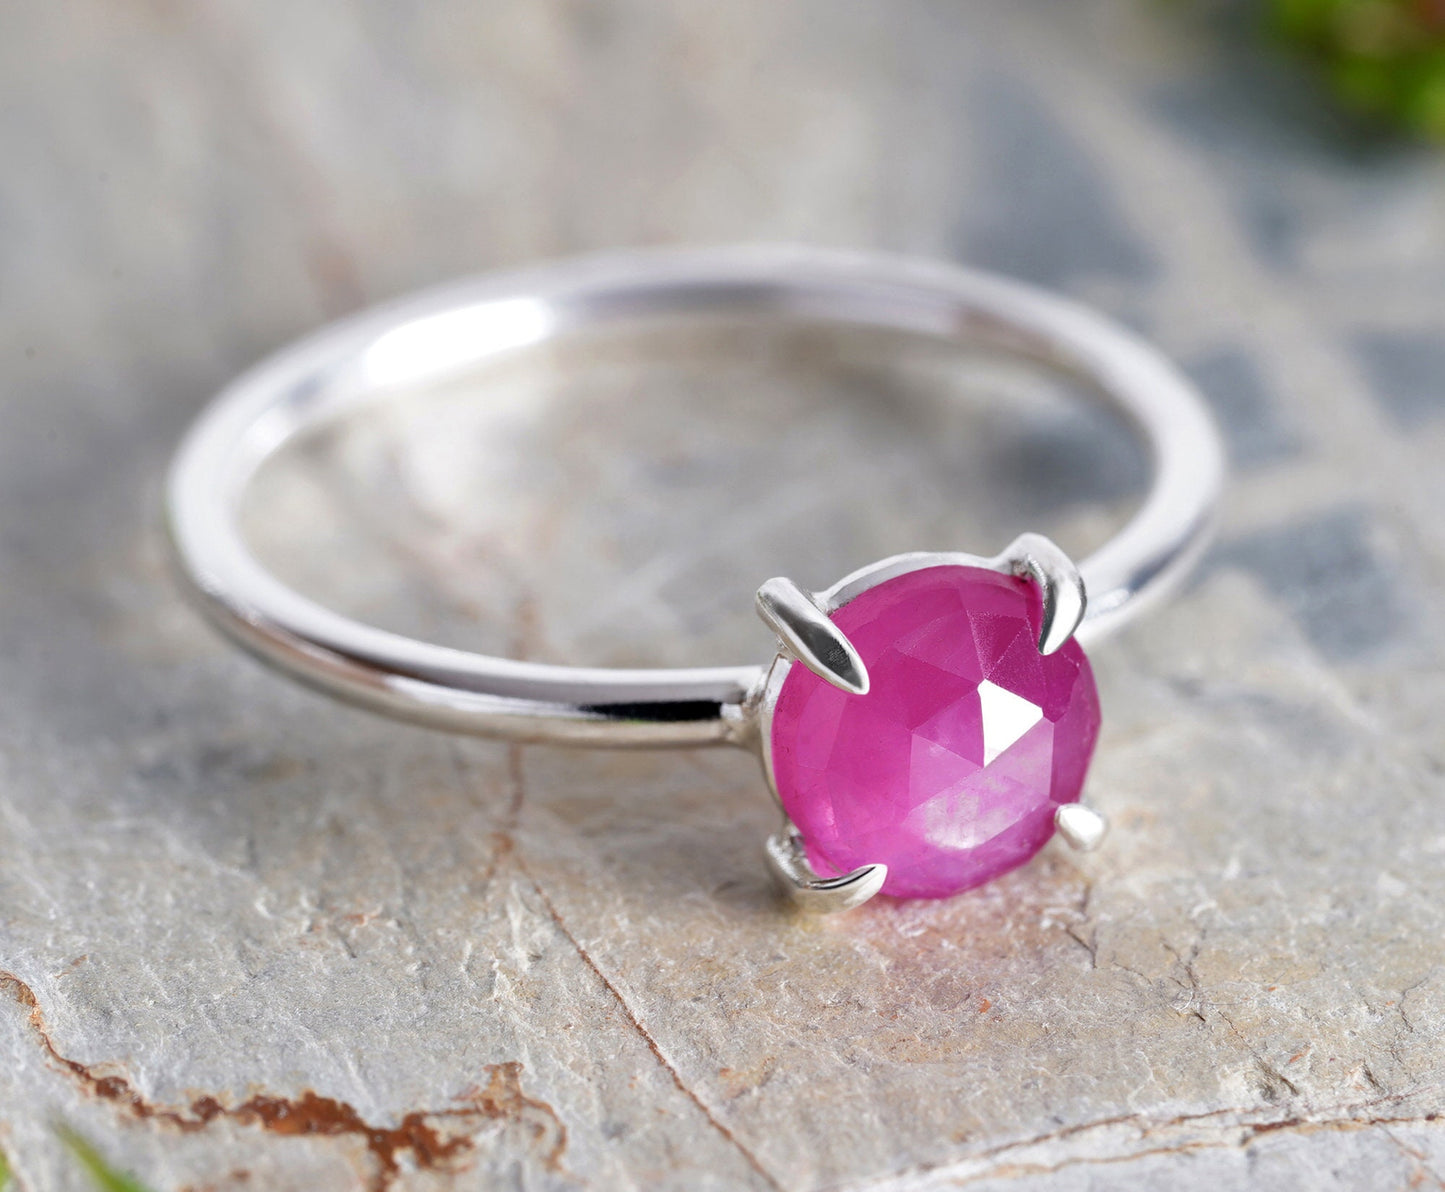 Pink Sapphire Ring, 6mm Sapphire Ring in Rose Pink, Prong Set Pink Sapphire Ring